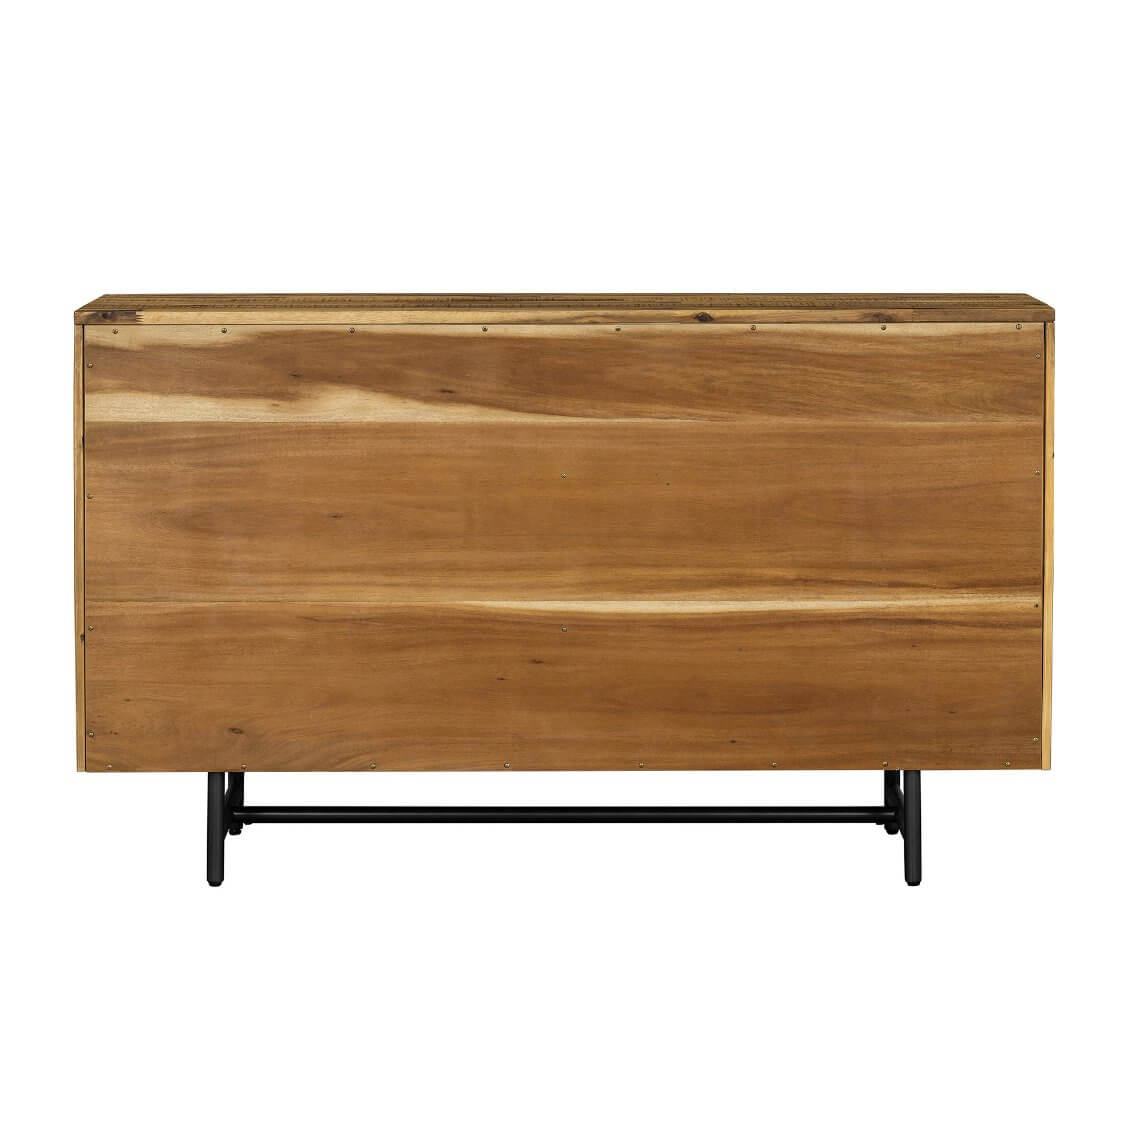 MidCentury Modern Solid Wood Six Drawer Double Dresser Brown And Black 57" - Revel Sofa 